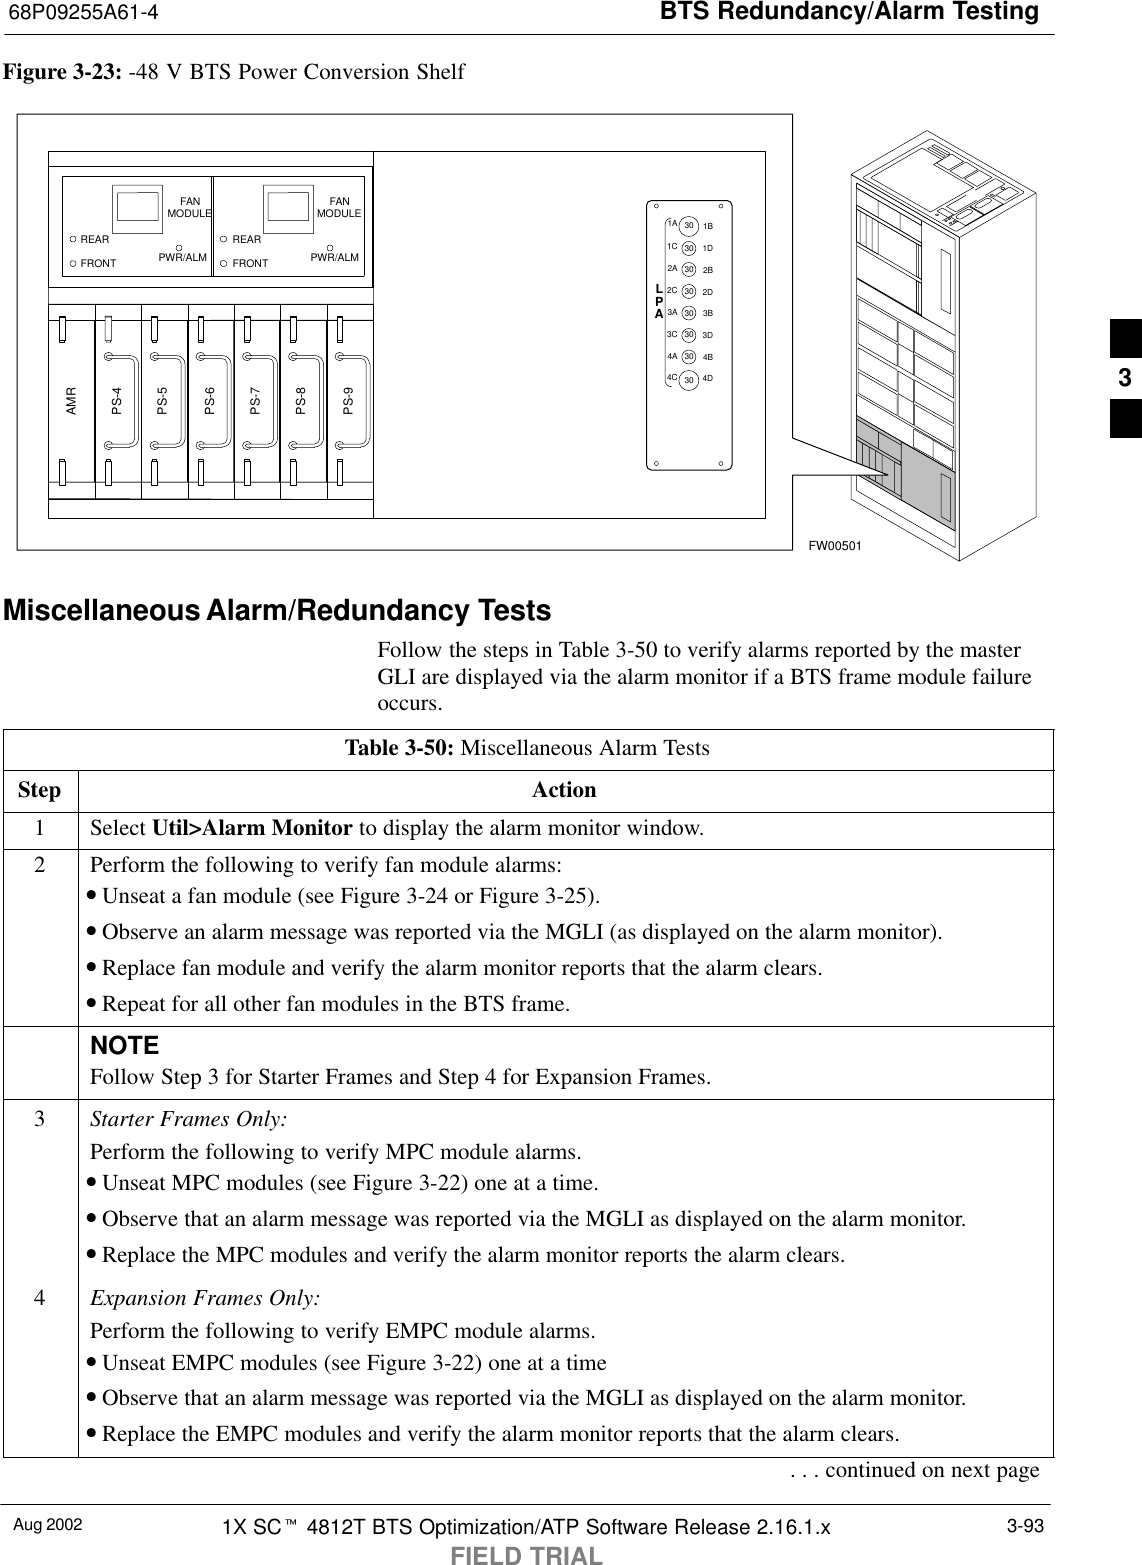 BTS Redundancy/Alarm Testing68P09255A61-4Aug 2002 1X SCt 4812T BTS Optimization/ATP Software Release 2.16.1.xFIELD TRIAL3-93Figure 3-23: -48 V BTS Power Conversion ShelfFW00501PS-6AMRPS-5PS-4PS-9PS-8PS-71C1A2A2C3C3A4A4CLPA1D1B2B2D3D3B4B4D3030303030303030FANMODULEPWR/ALMREARFRONTFANMODULEPWR/ALMREARFRONTMiscellaneous Alarm/Redundancy TestsFollow the steps in Table 3-50 to verify alarms reported by the masterGLI are displayed via the alarm monitor if a BTS frame module failureoccurs.Table 3-50: Miscellaneous Alarm TestsStep Action1 Select Util&gt;Alarm Monitor to display the alarm monitor window.2Perform the following to verify fan module alarms:•Unseat a fan module (see Figure 3-24 or Figure 3-25).•Observe an alarm message was reported via the MGLI (as displayed on the alarm monitor).•Replace fan module and verify the alarm monitor reports that the alarm clears.•Repeat for all other fan modules in the BTS frame.NOTEFollow Step 3 for Starter Frames and Step 4 for Expansion Frames.3Starter Frames Only:Perform the following to verify MPC module alarms.•Unseat MPC modules (see Figure 3-22) one at a time.•Observe that an alarm message was reported via the MGLI as displayed on the alarm monitor.•Replace the MPC modules and verify the alarm monitor reports the alarm clears.4Expansion Frames Only:Perform the following to verify EMPC module alarms.•Unseat EMPC modules (see Figure 3-22) one at a time•Observe that an alarm message was reported via the MGLI as displayed on the alarm monitor.•Replace the EMPC modules and verify the alarm monitor reports that the alarm clears.. . . continued on next page3